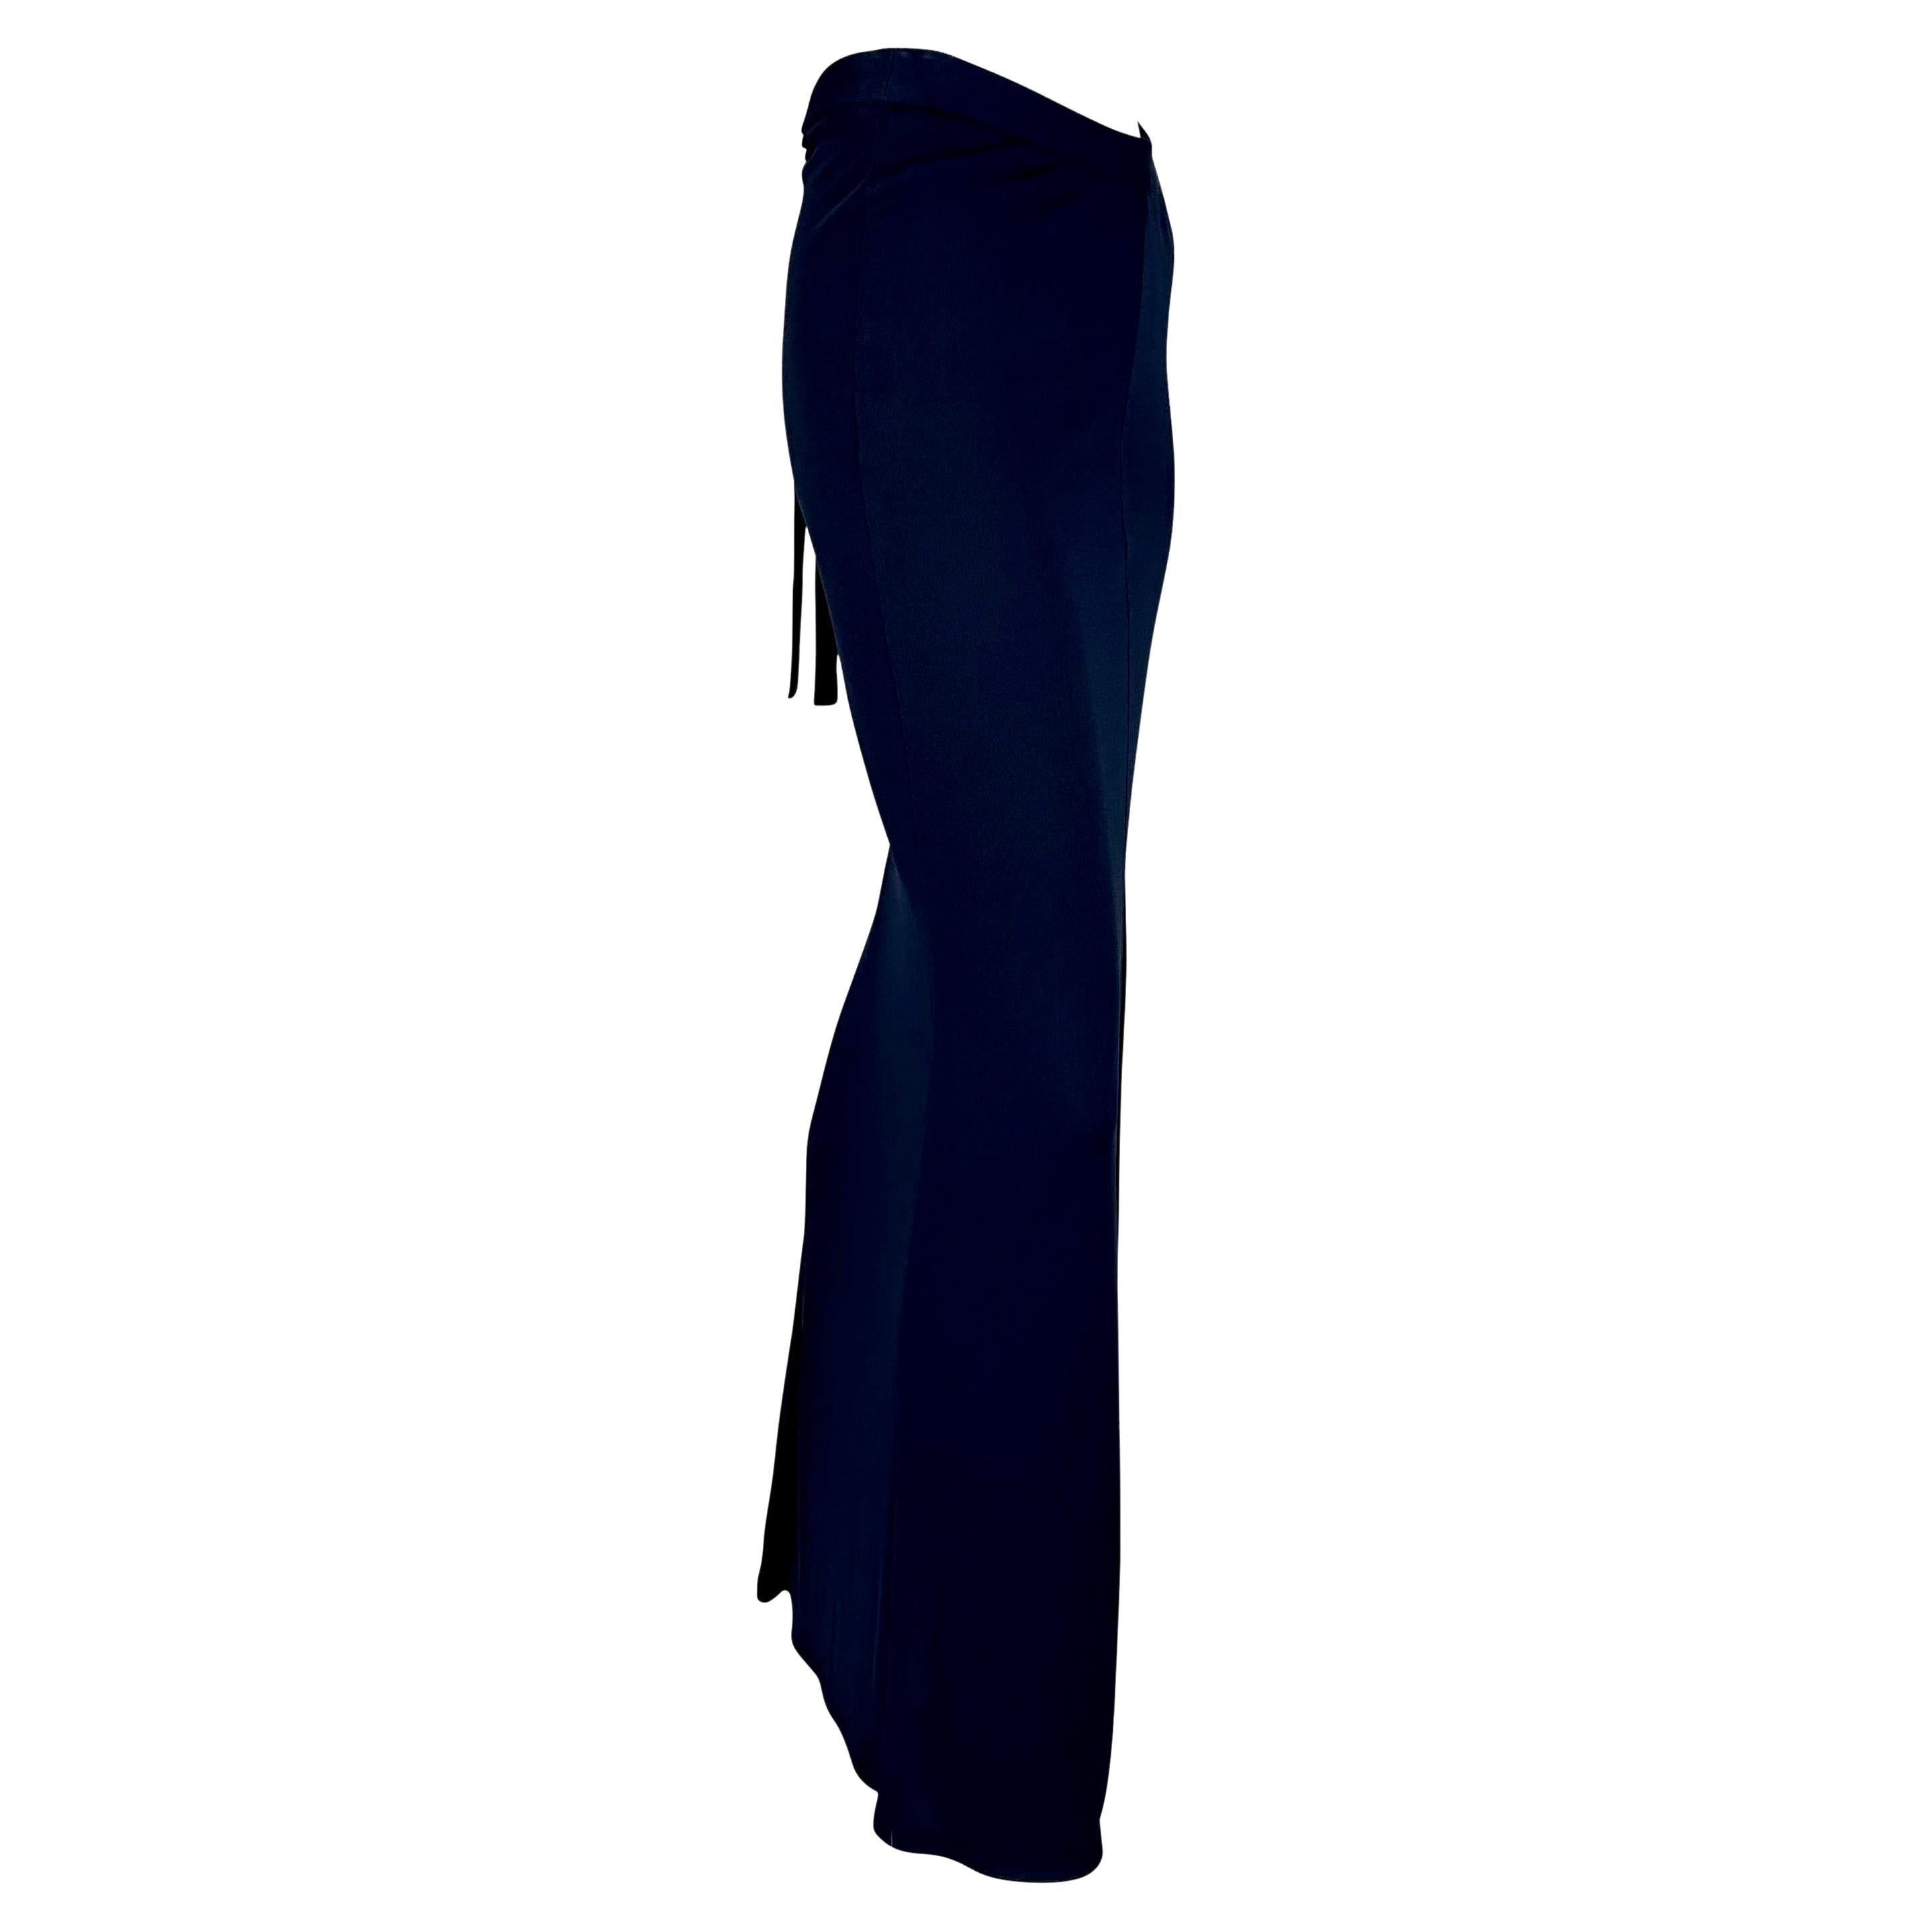 S/S 1997 Gucci by Tom Ford Navy Maxi Slit Buckle Tie Skirt Sample  For Sale 1